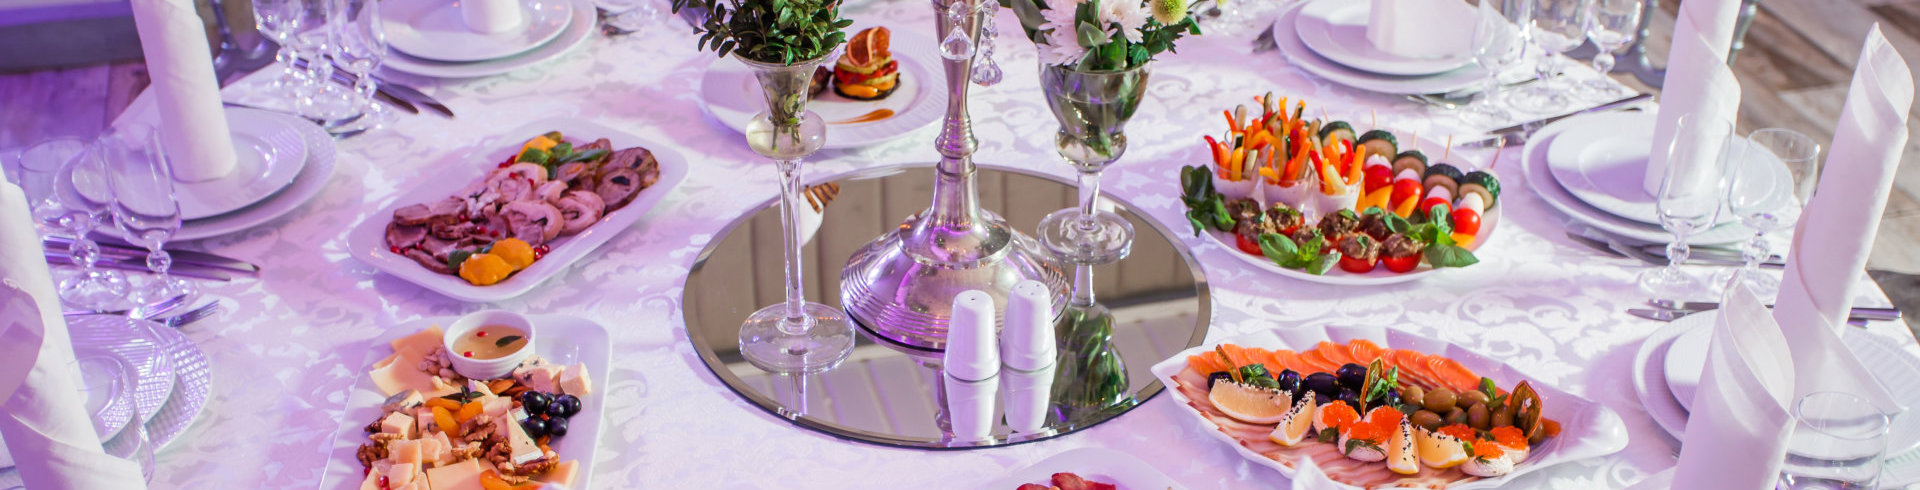 a silver canister with flowers and salt shakers on a table